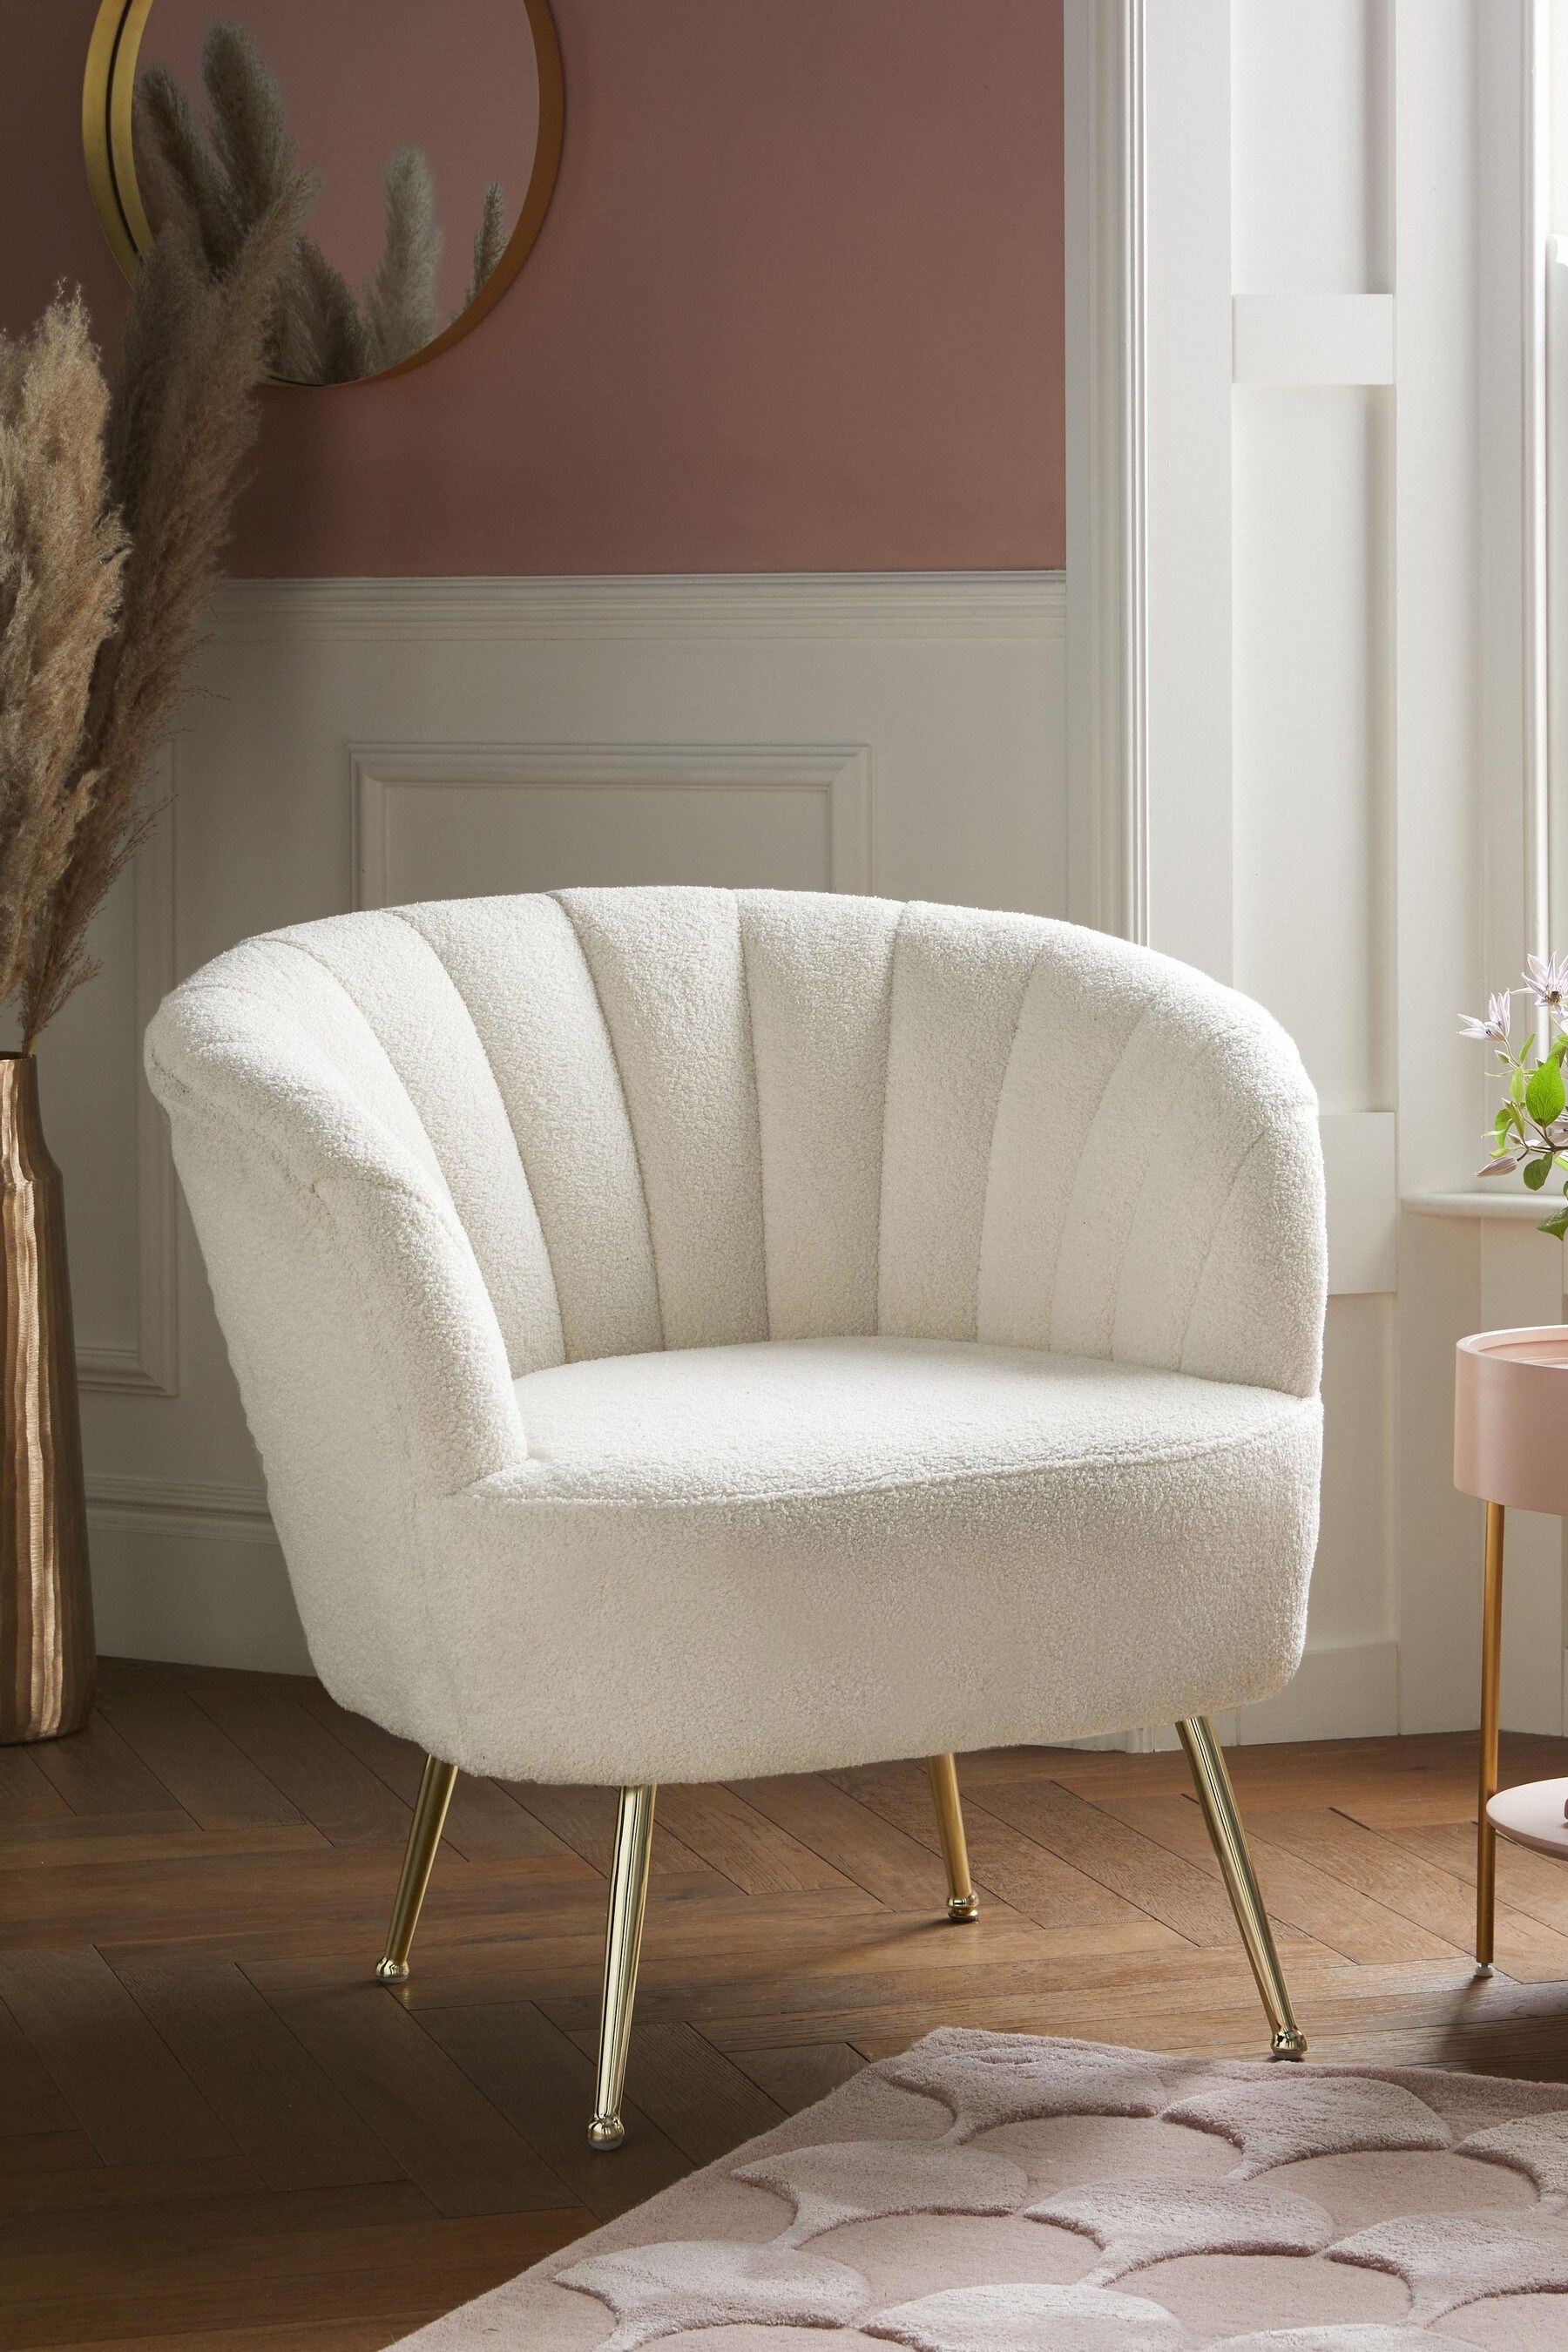 Creatice Accent Chairs Uk Online for Simple Design